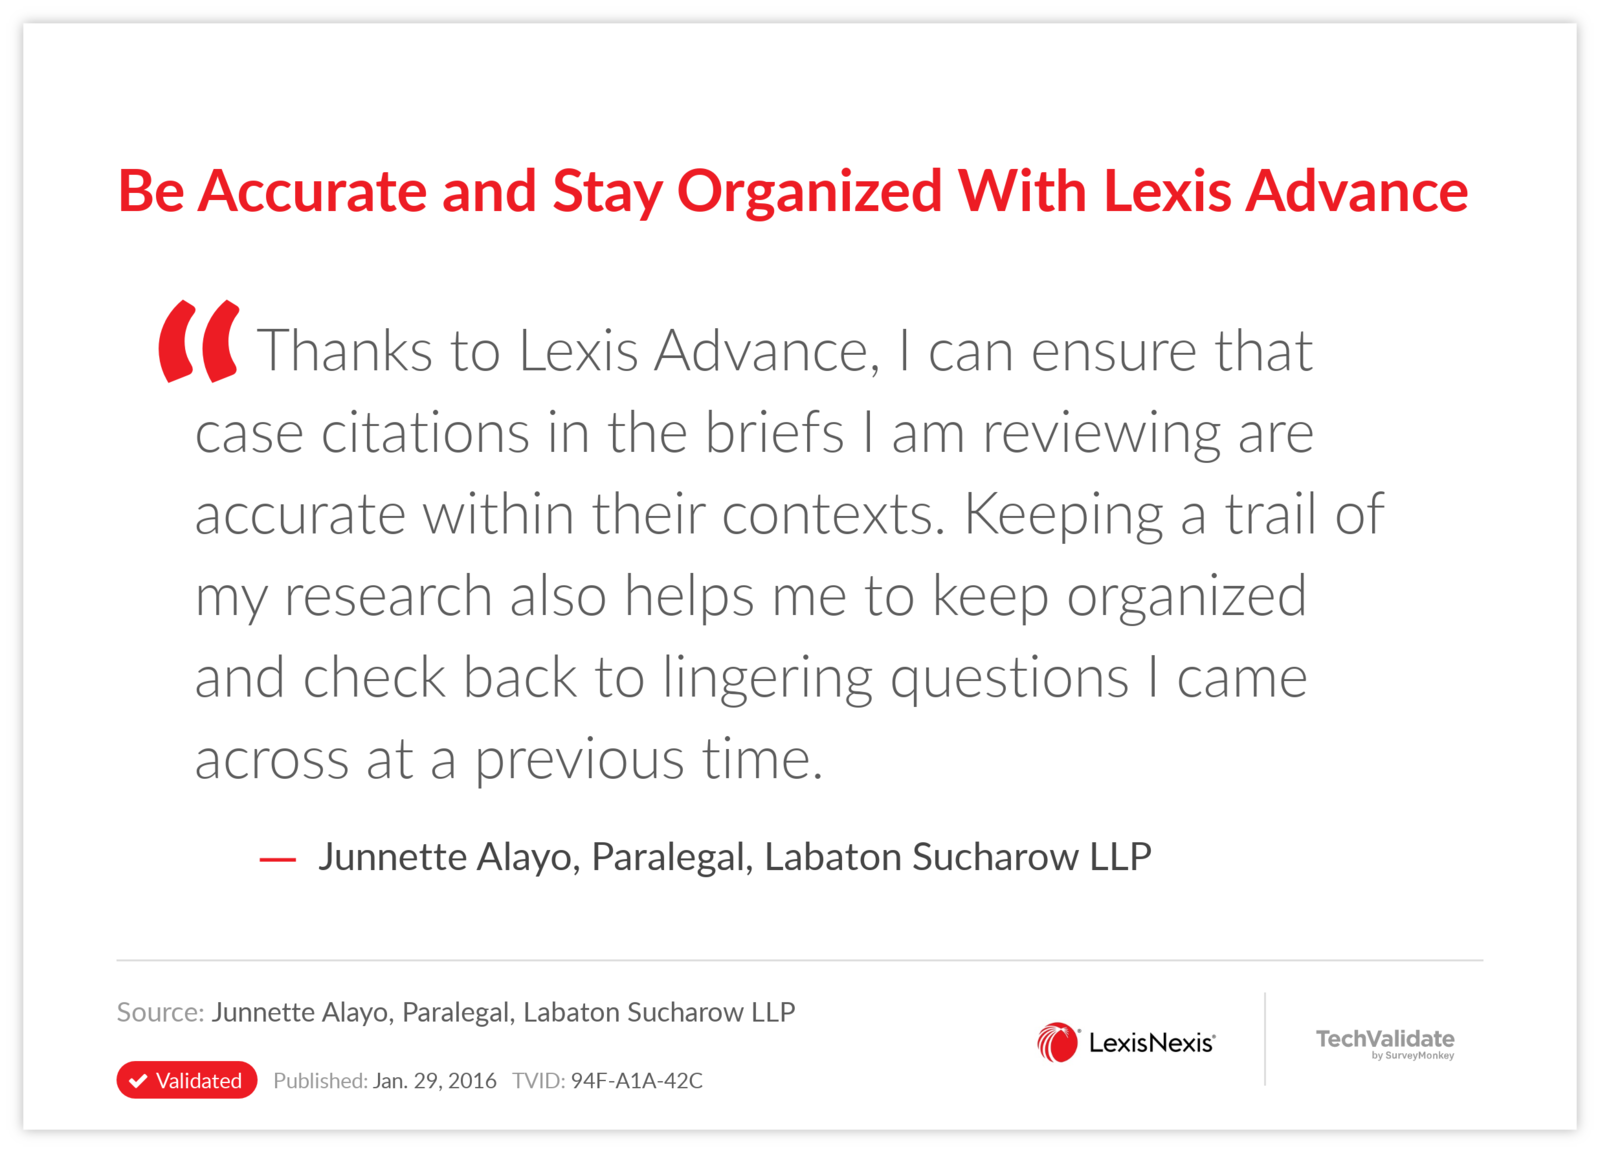 Be Accurate and Stay Organized With Lexis Advance